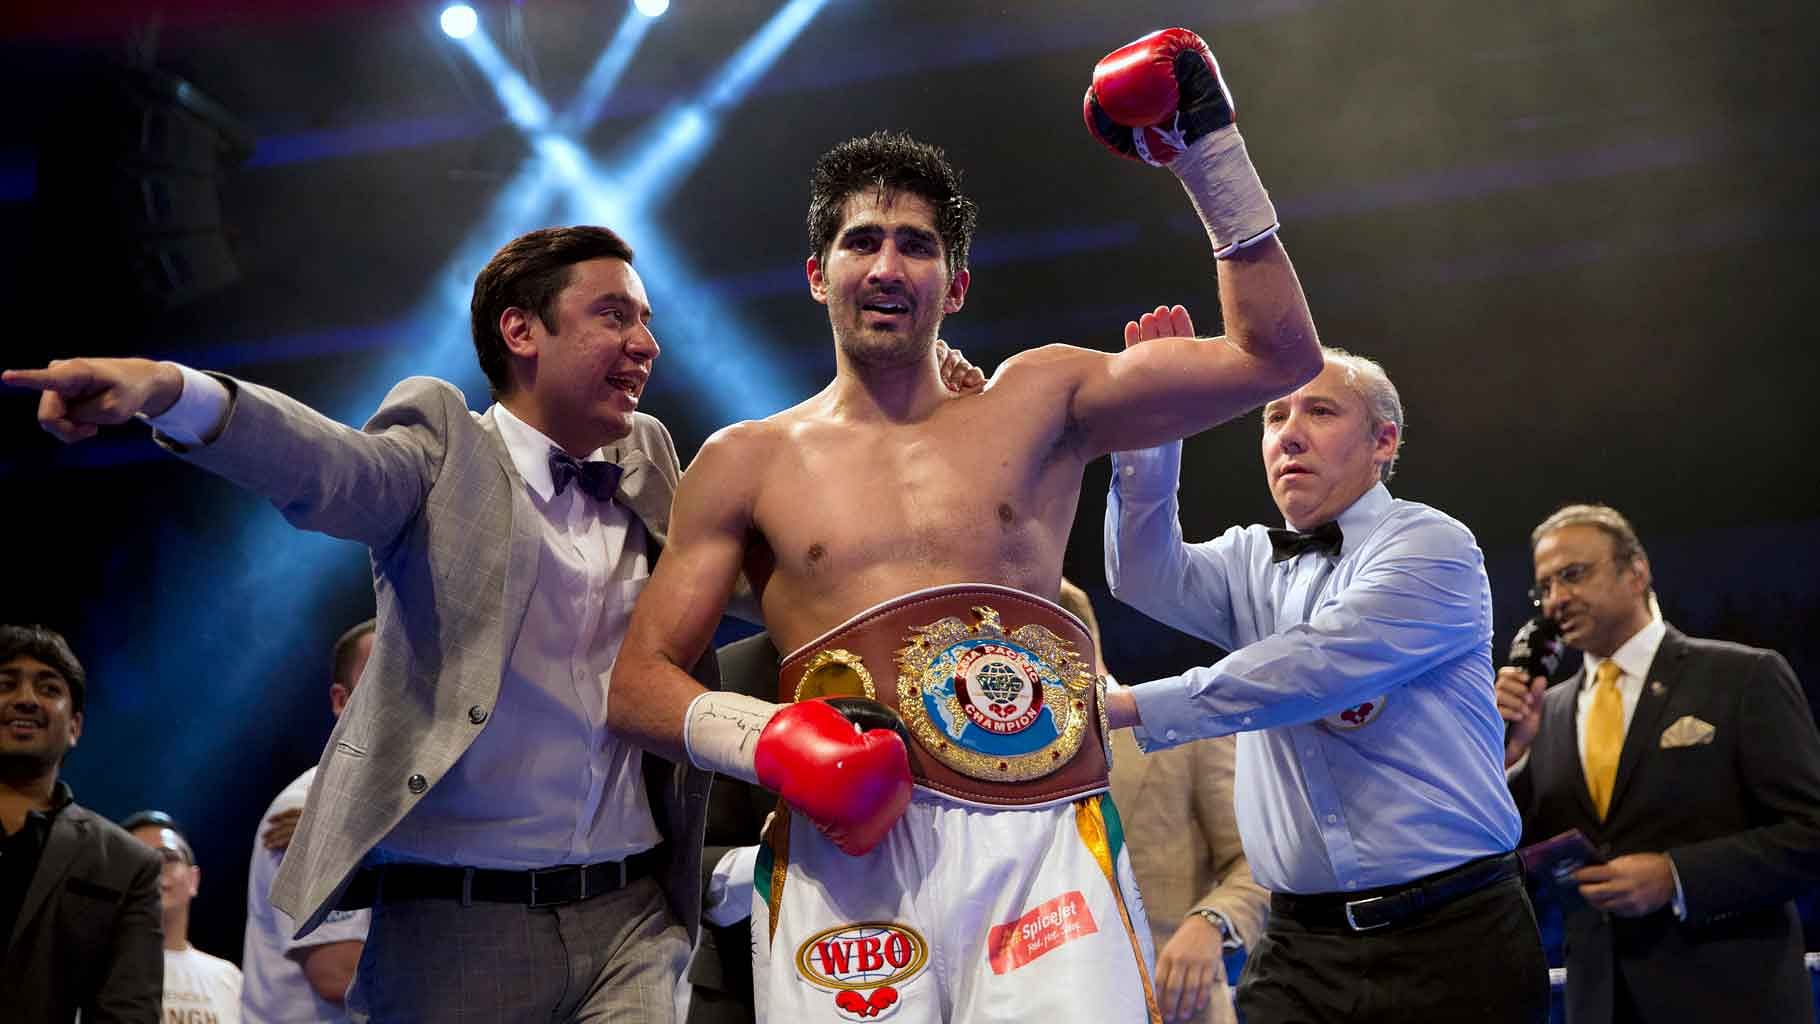 India’s Vijender Singh celebrates after winning Asia Pacific Super Middleweight Championship. (Photo: AP)